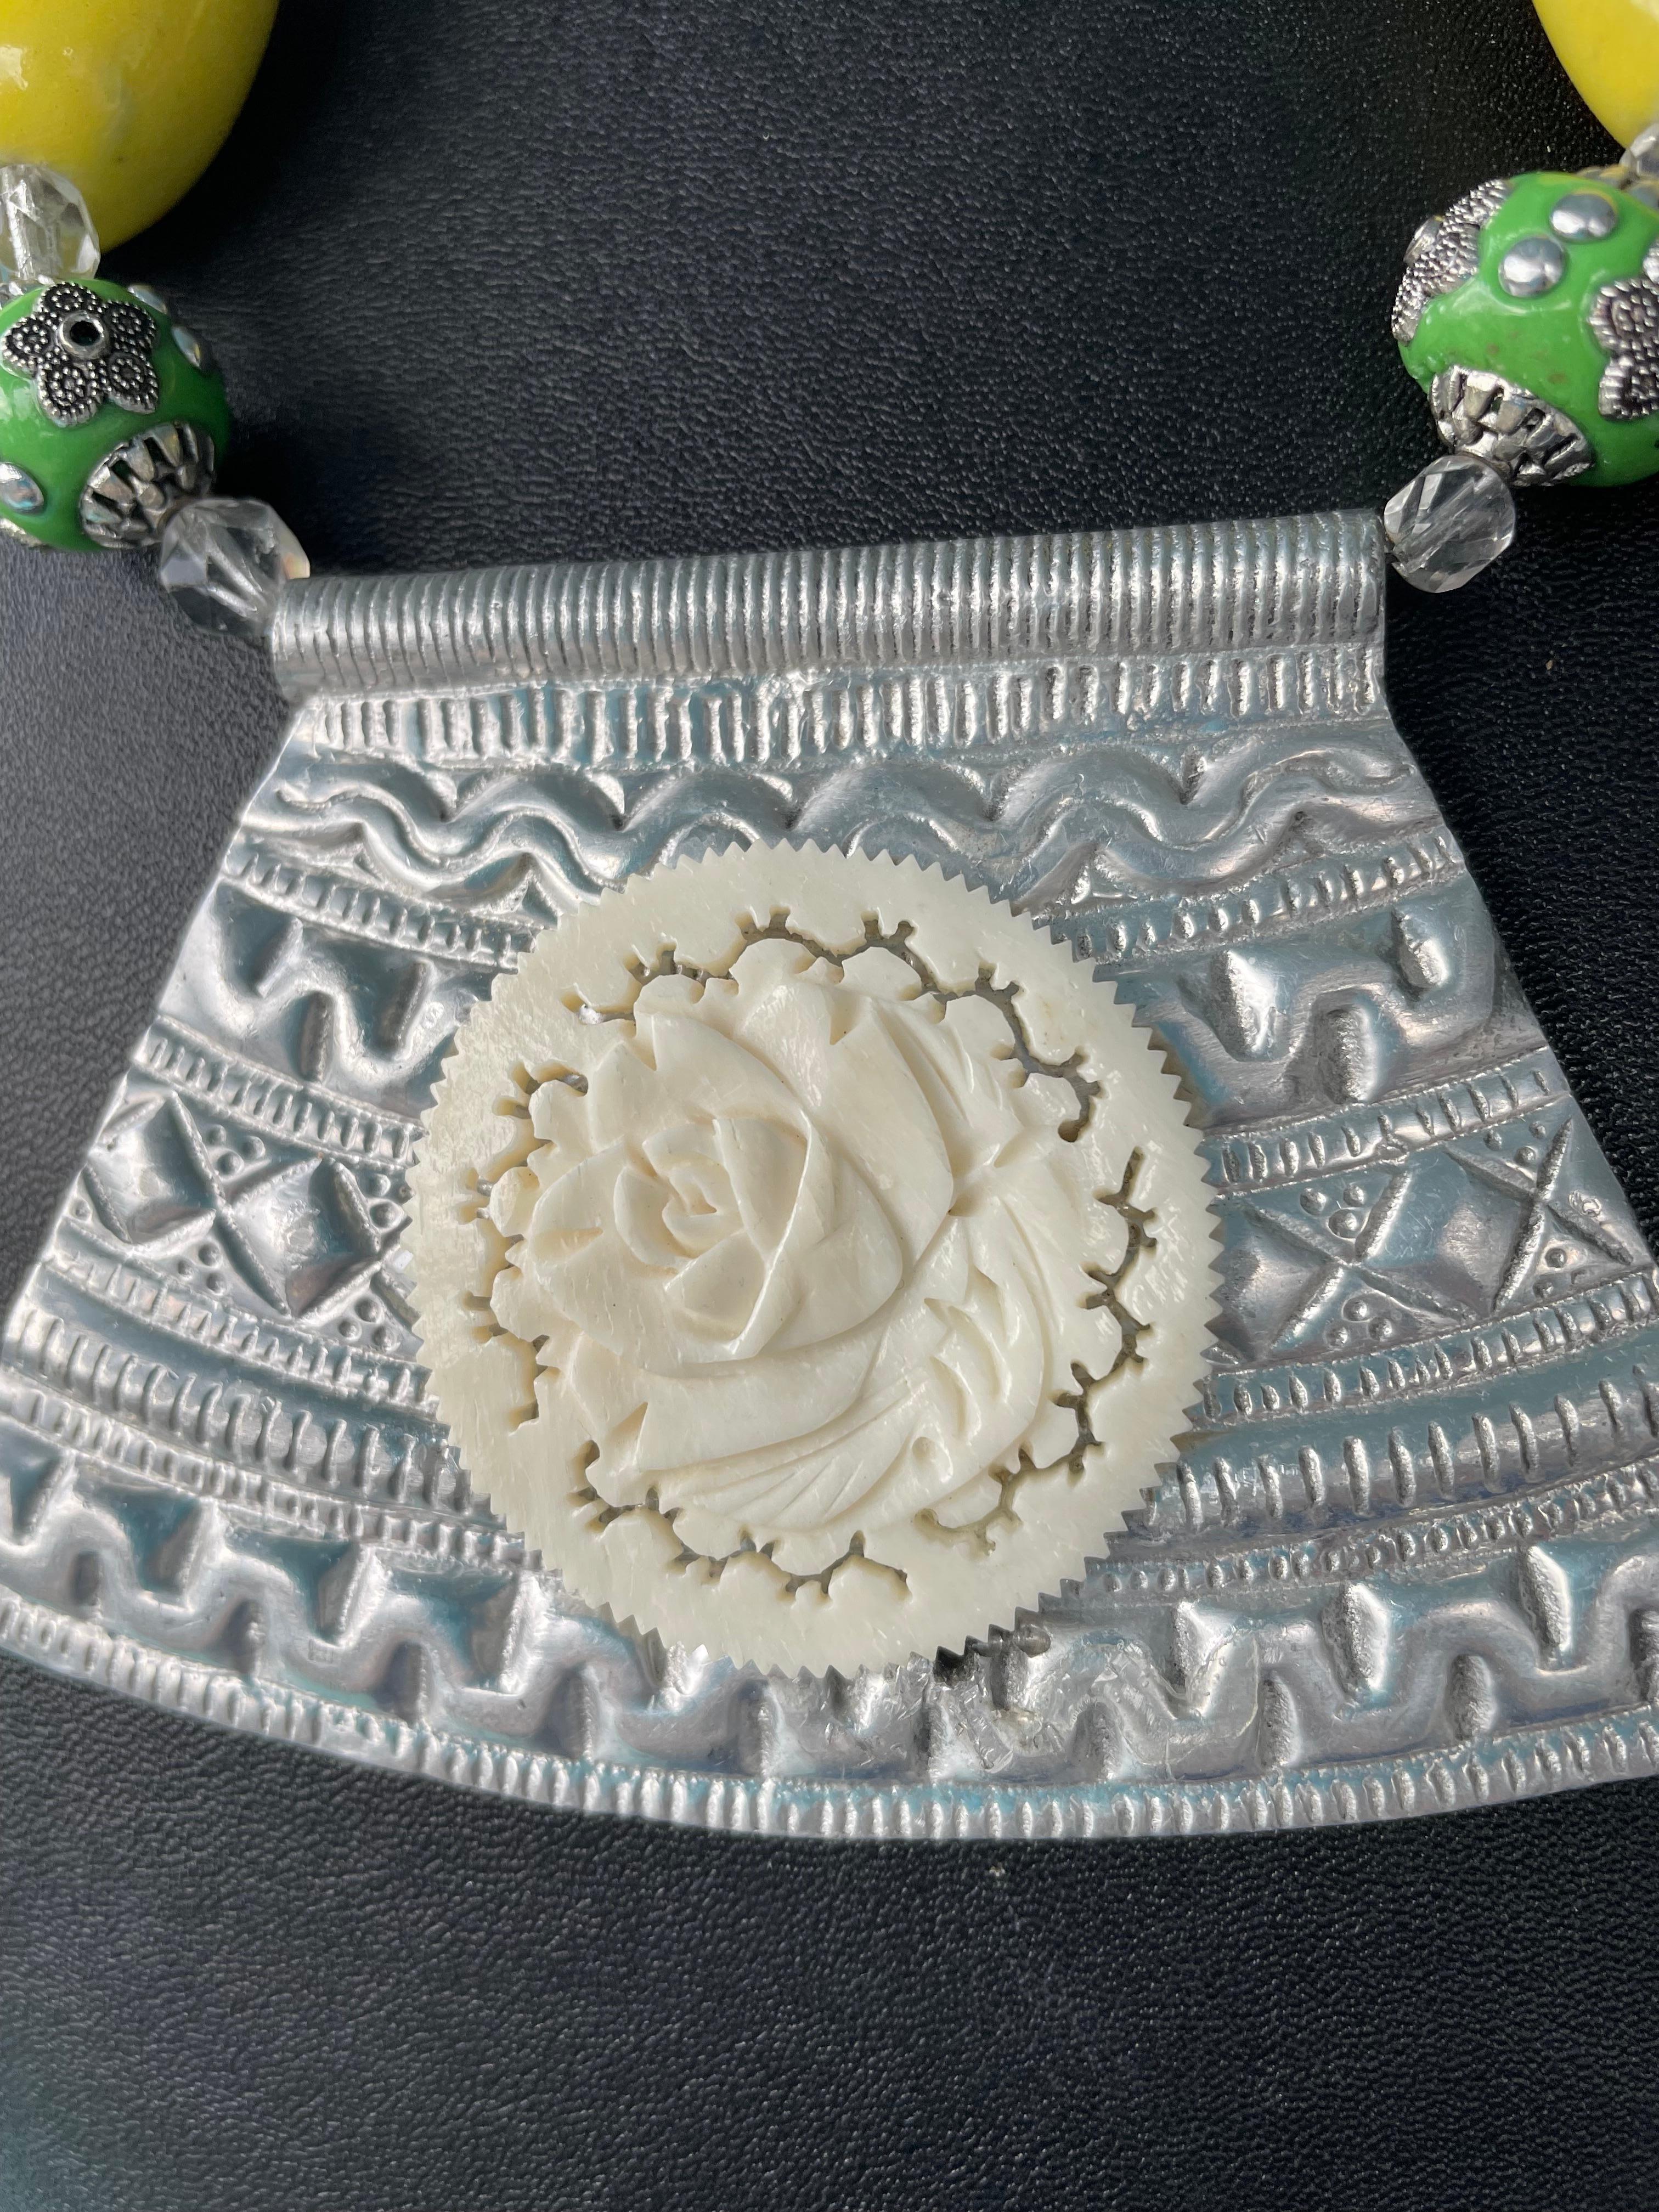 Lorraine’s Bijoux offers a Vintage Indian Metal and vintage carved Bone floral centerpiece necklace with large yellow Resin heart beads, Indonesian green resin and silver beads, Tibetan Silver carved beads, and green and yellow agate beads.
Some